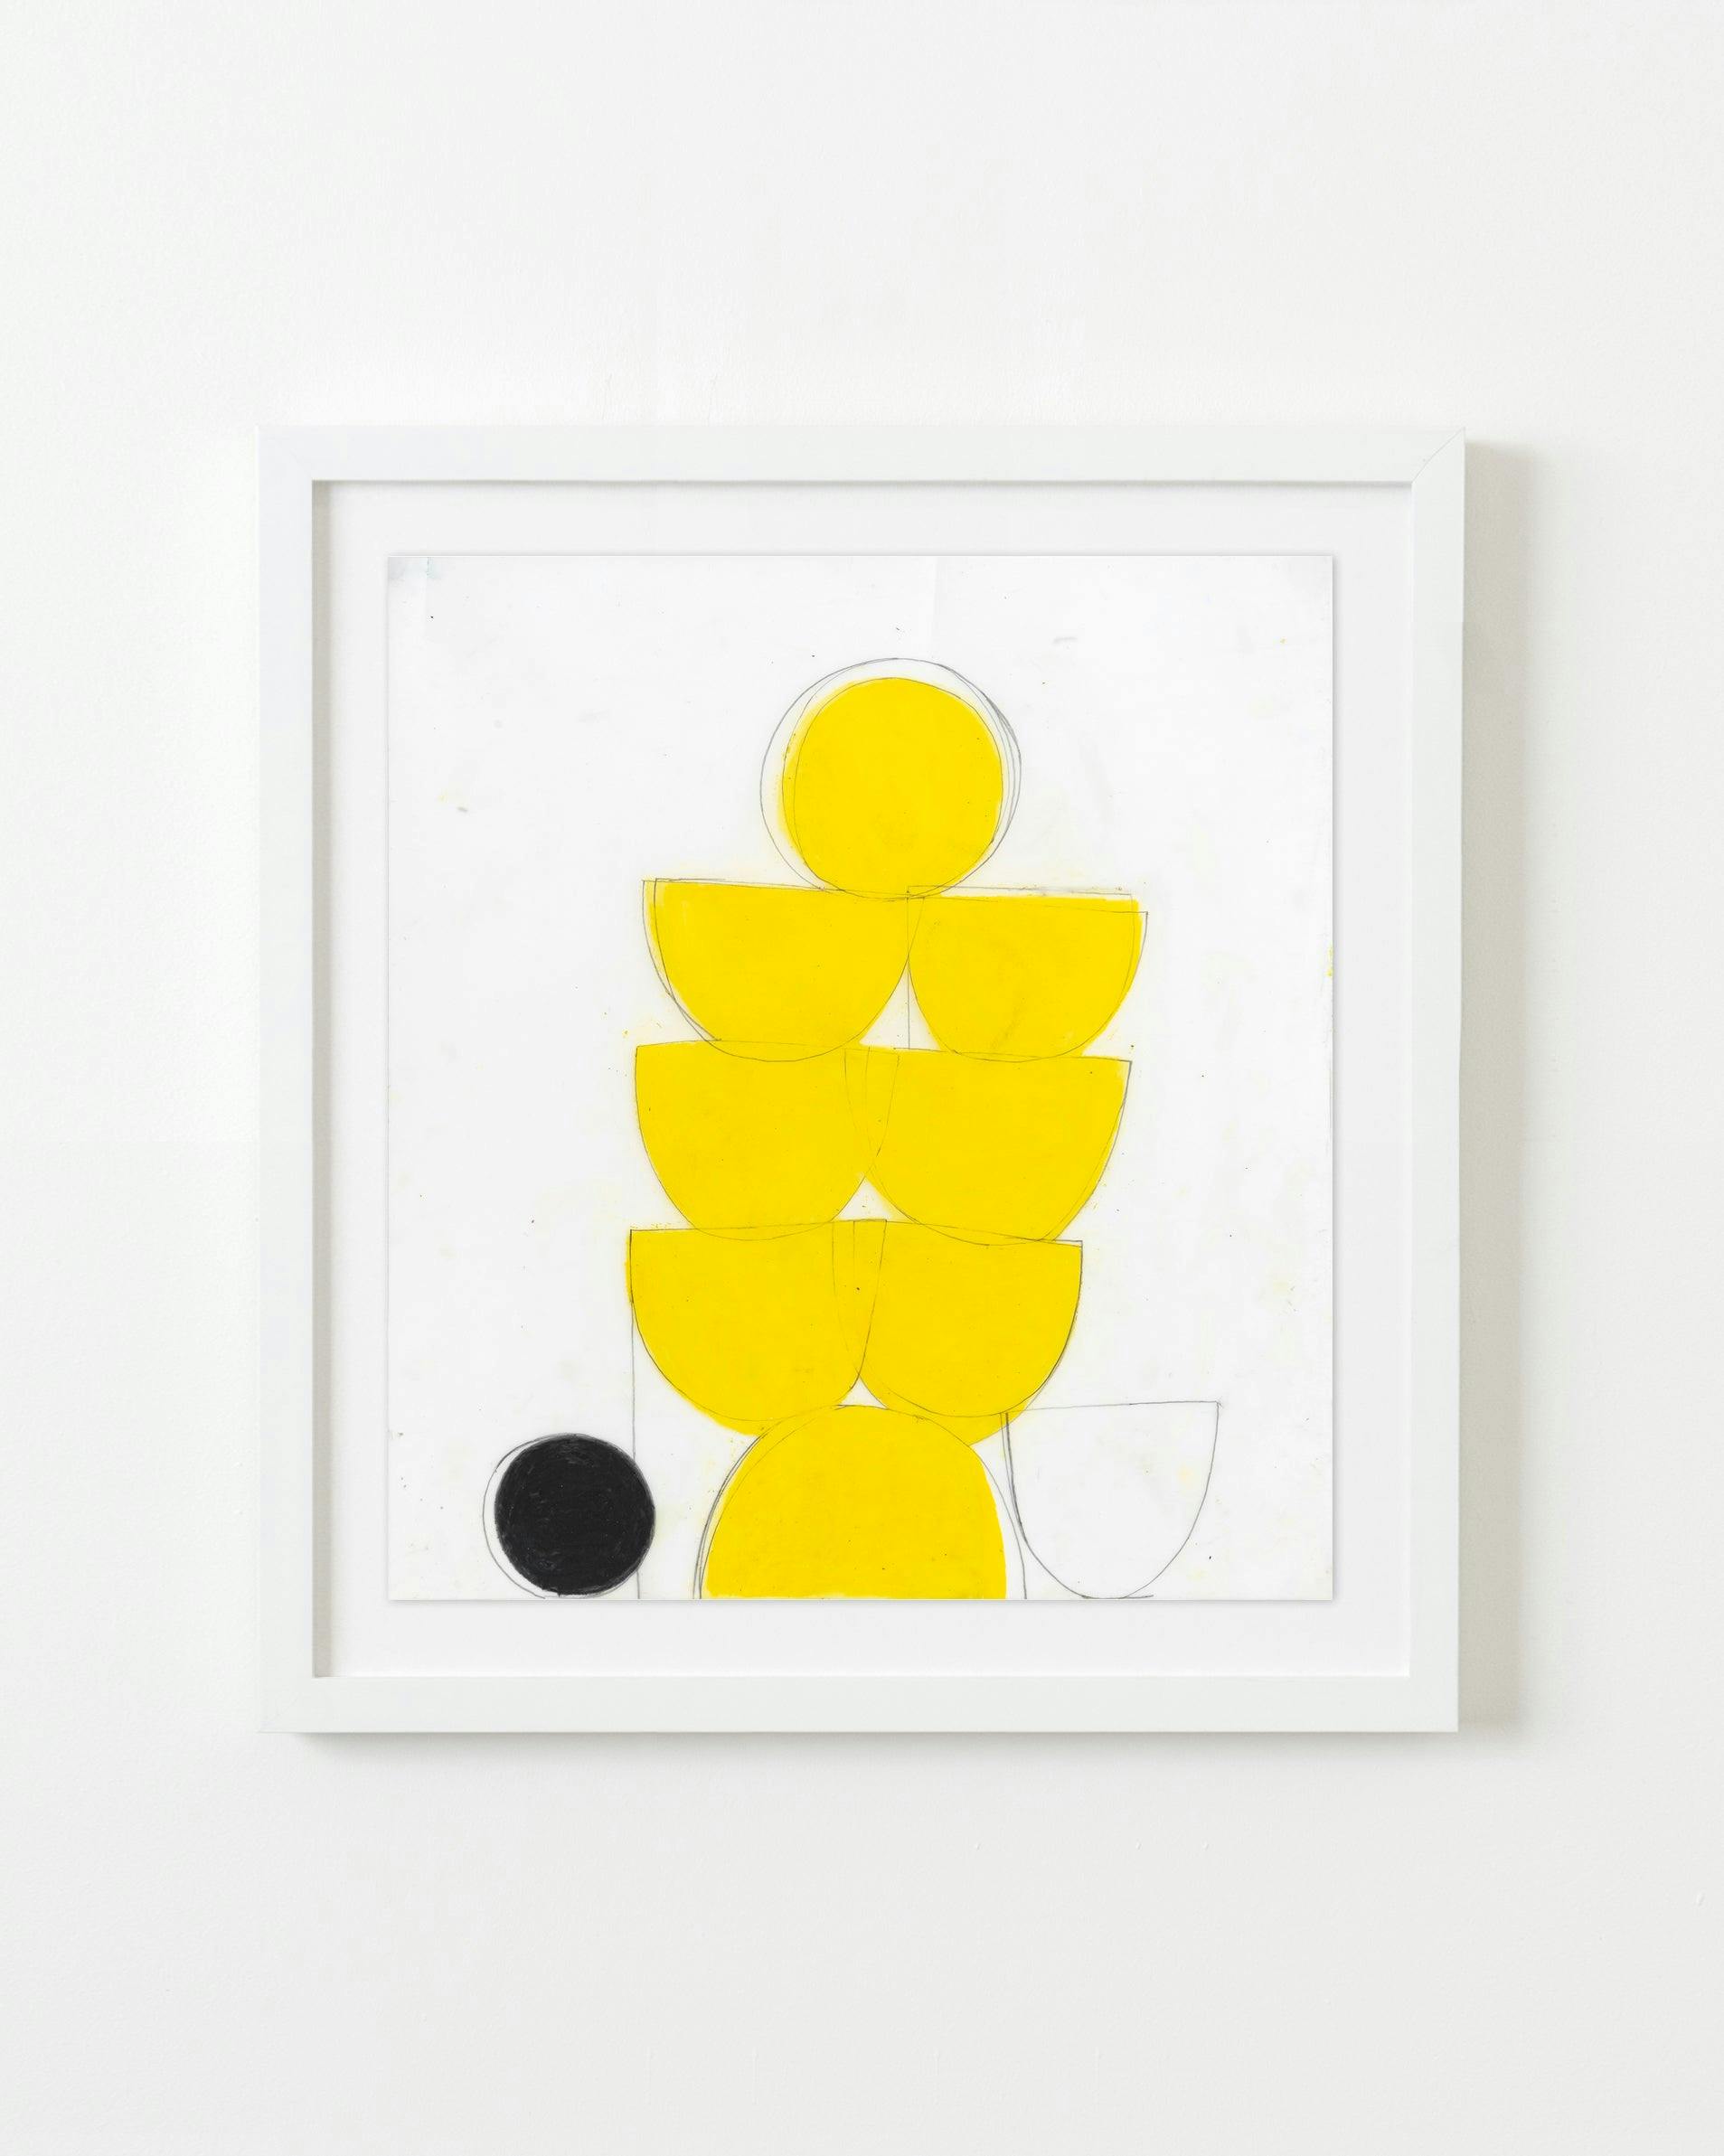 Drawing by Vicki Sher titled "Spring Formal (Yellow)".